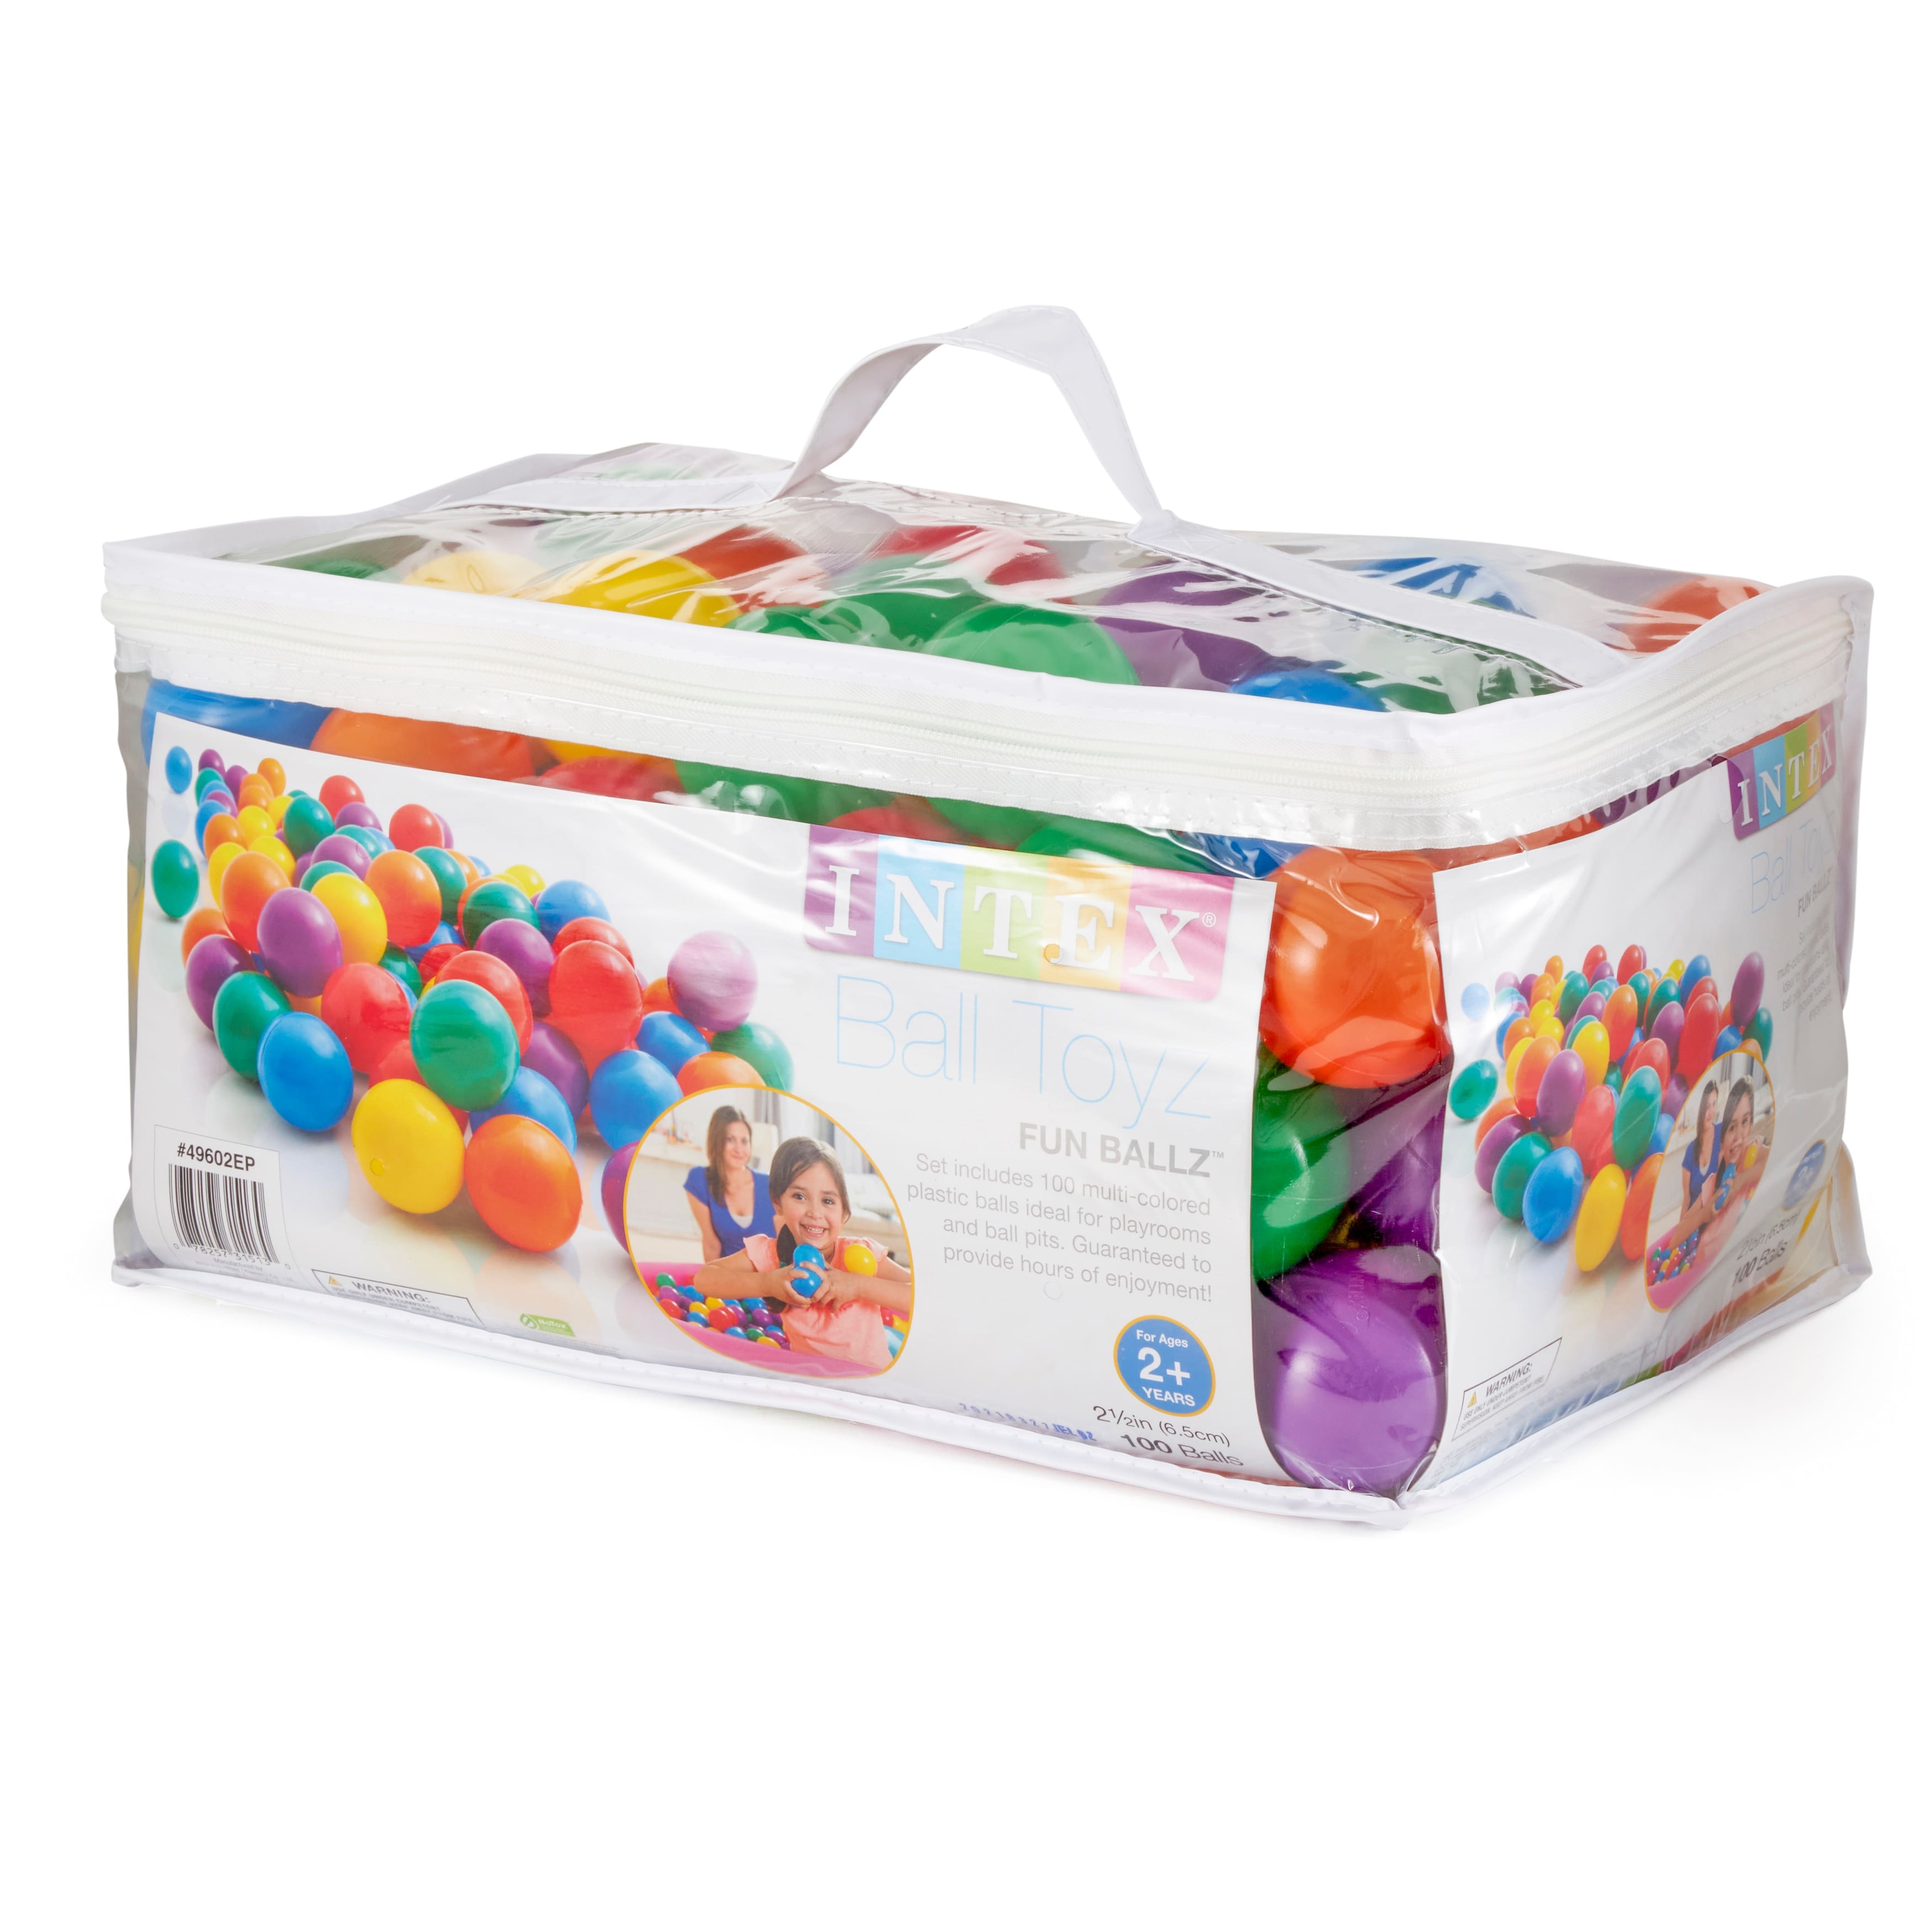 Intex 100-Pack Small Plastic Multi-Colored Fun Ballz for Bounce Houses (4 Pack) - 1.7